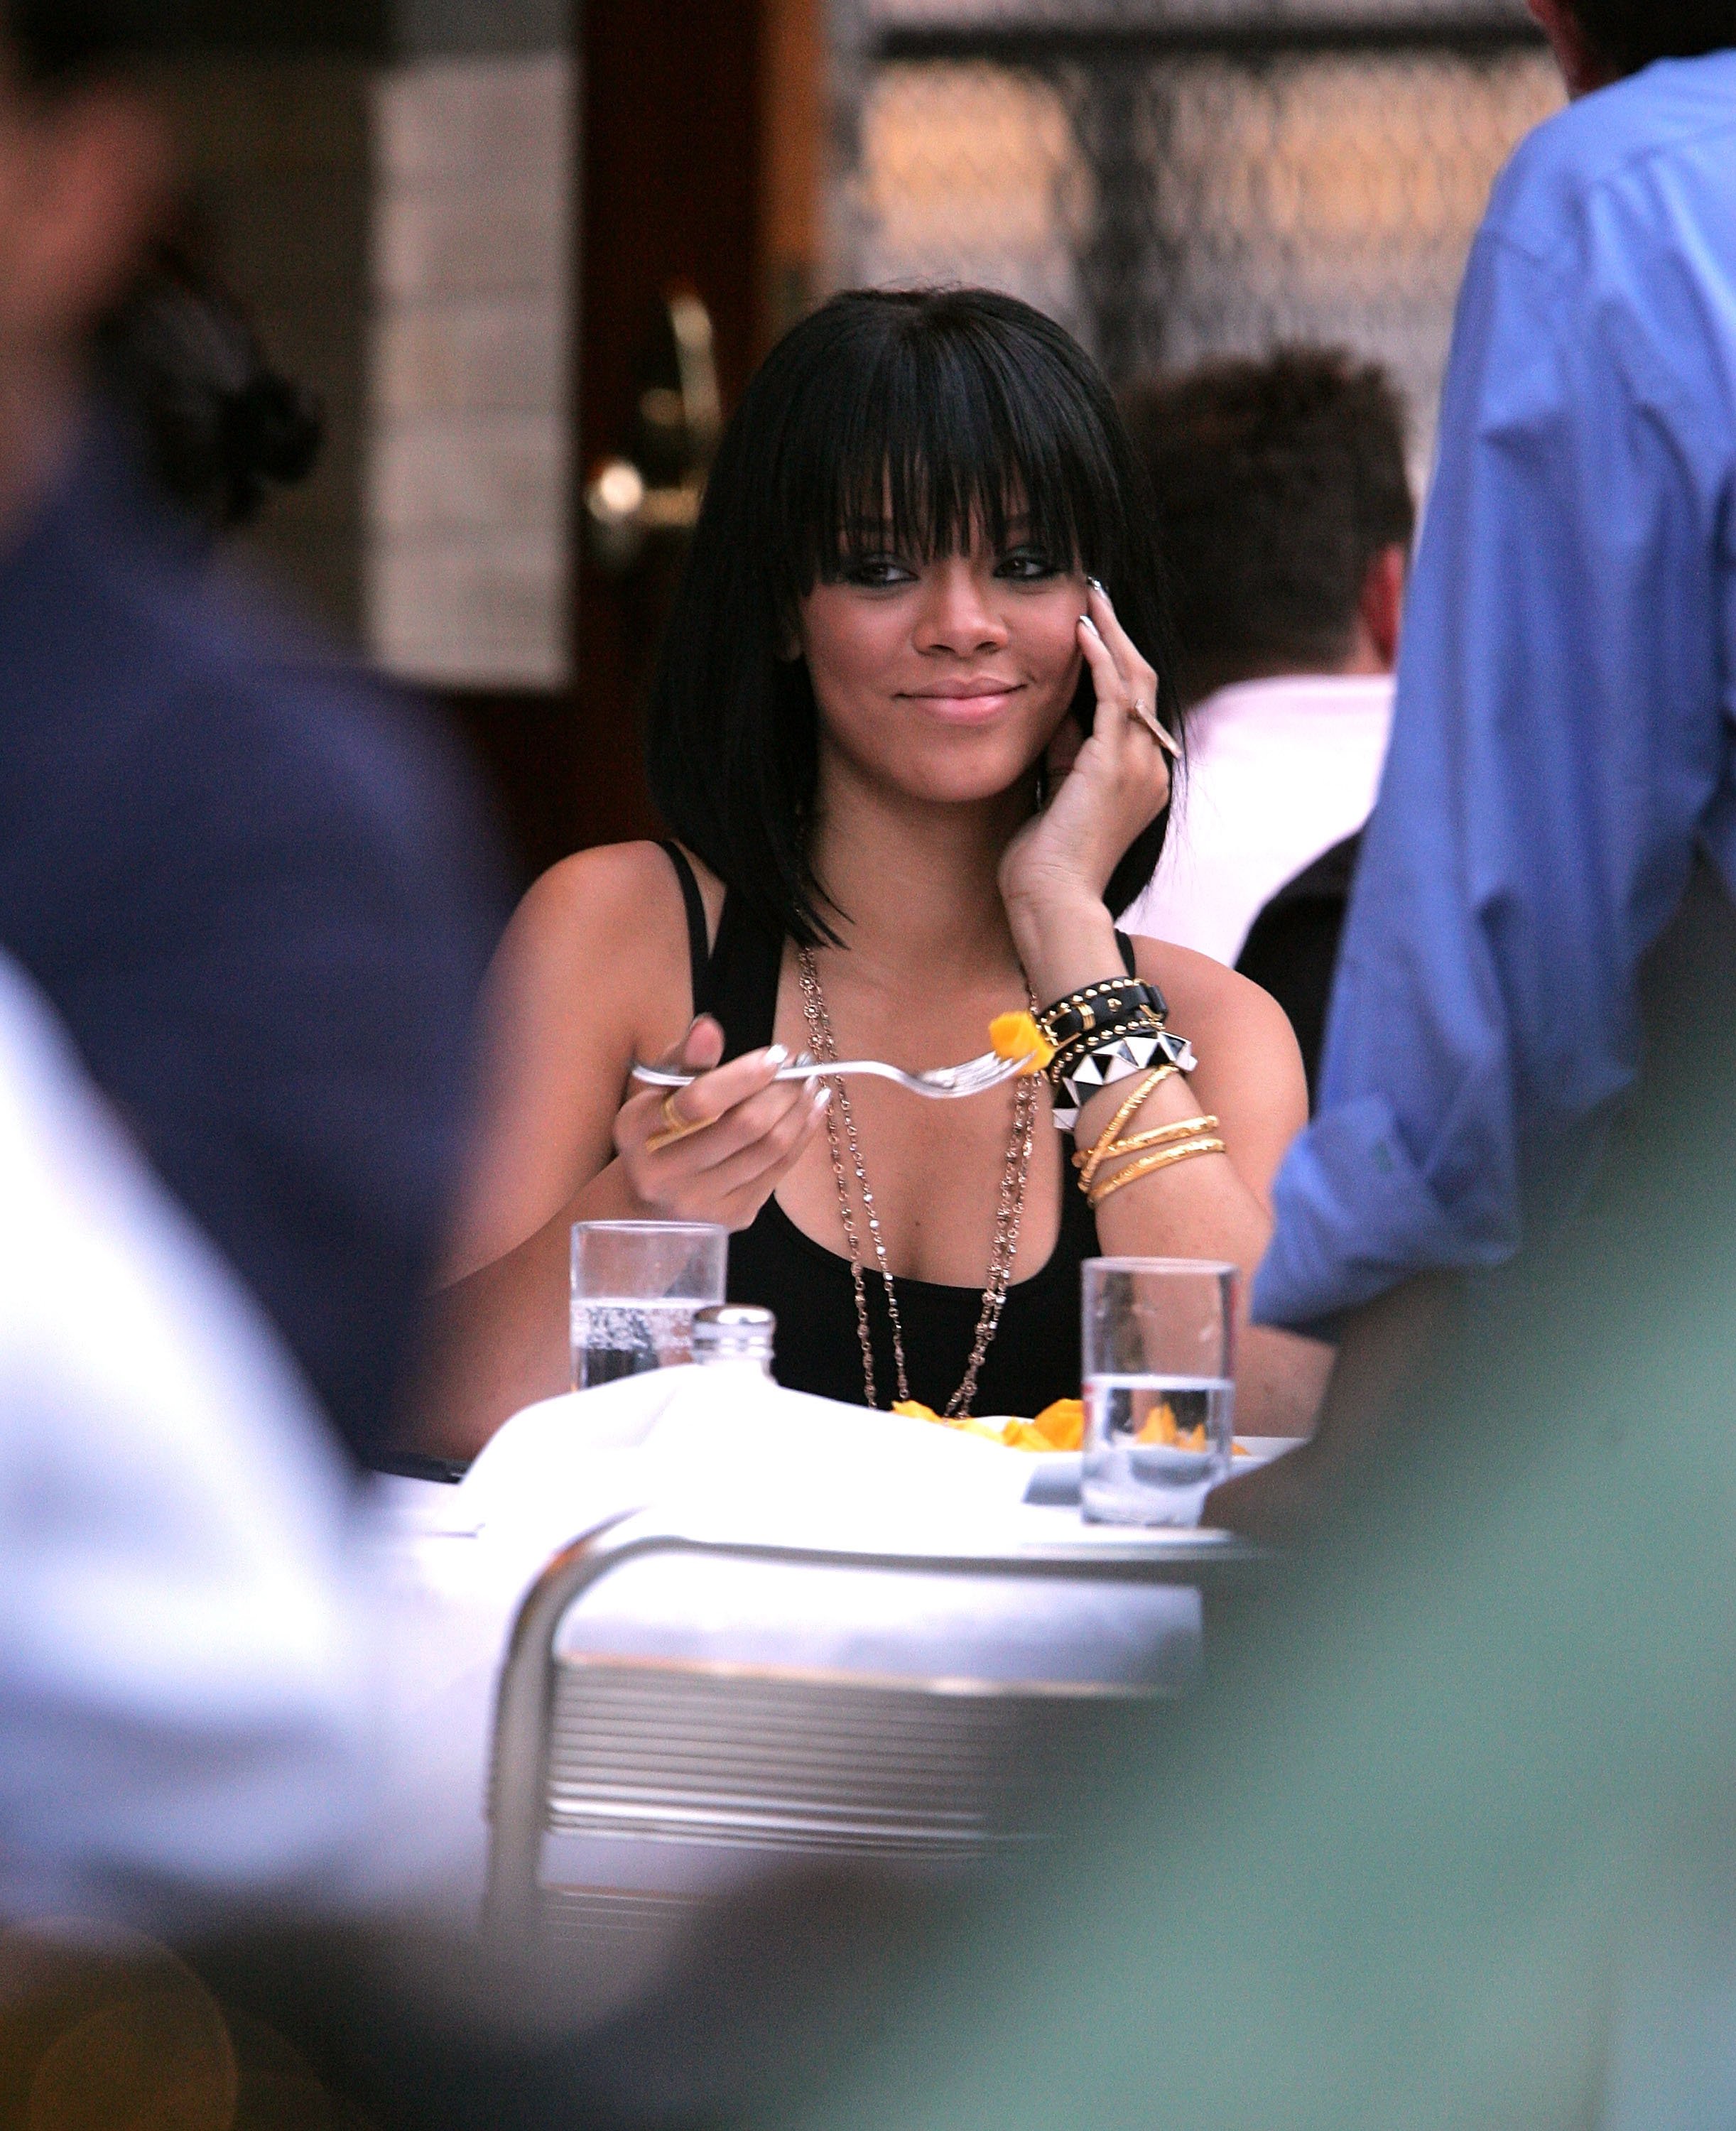 Rihanna at a restaurant in New York City | Source: Getty Images